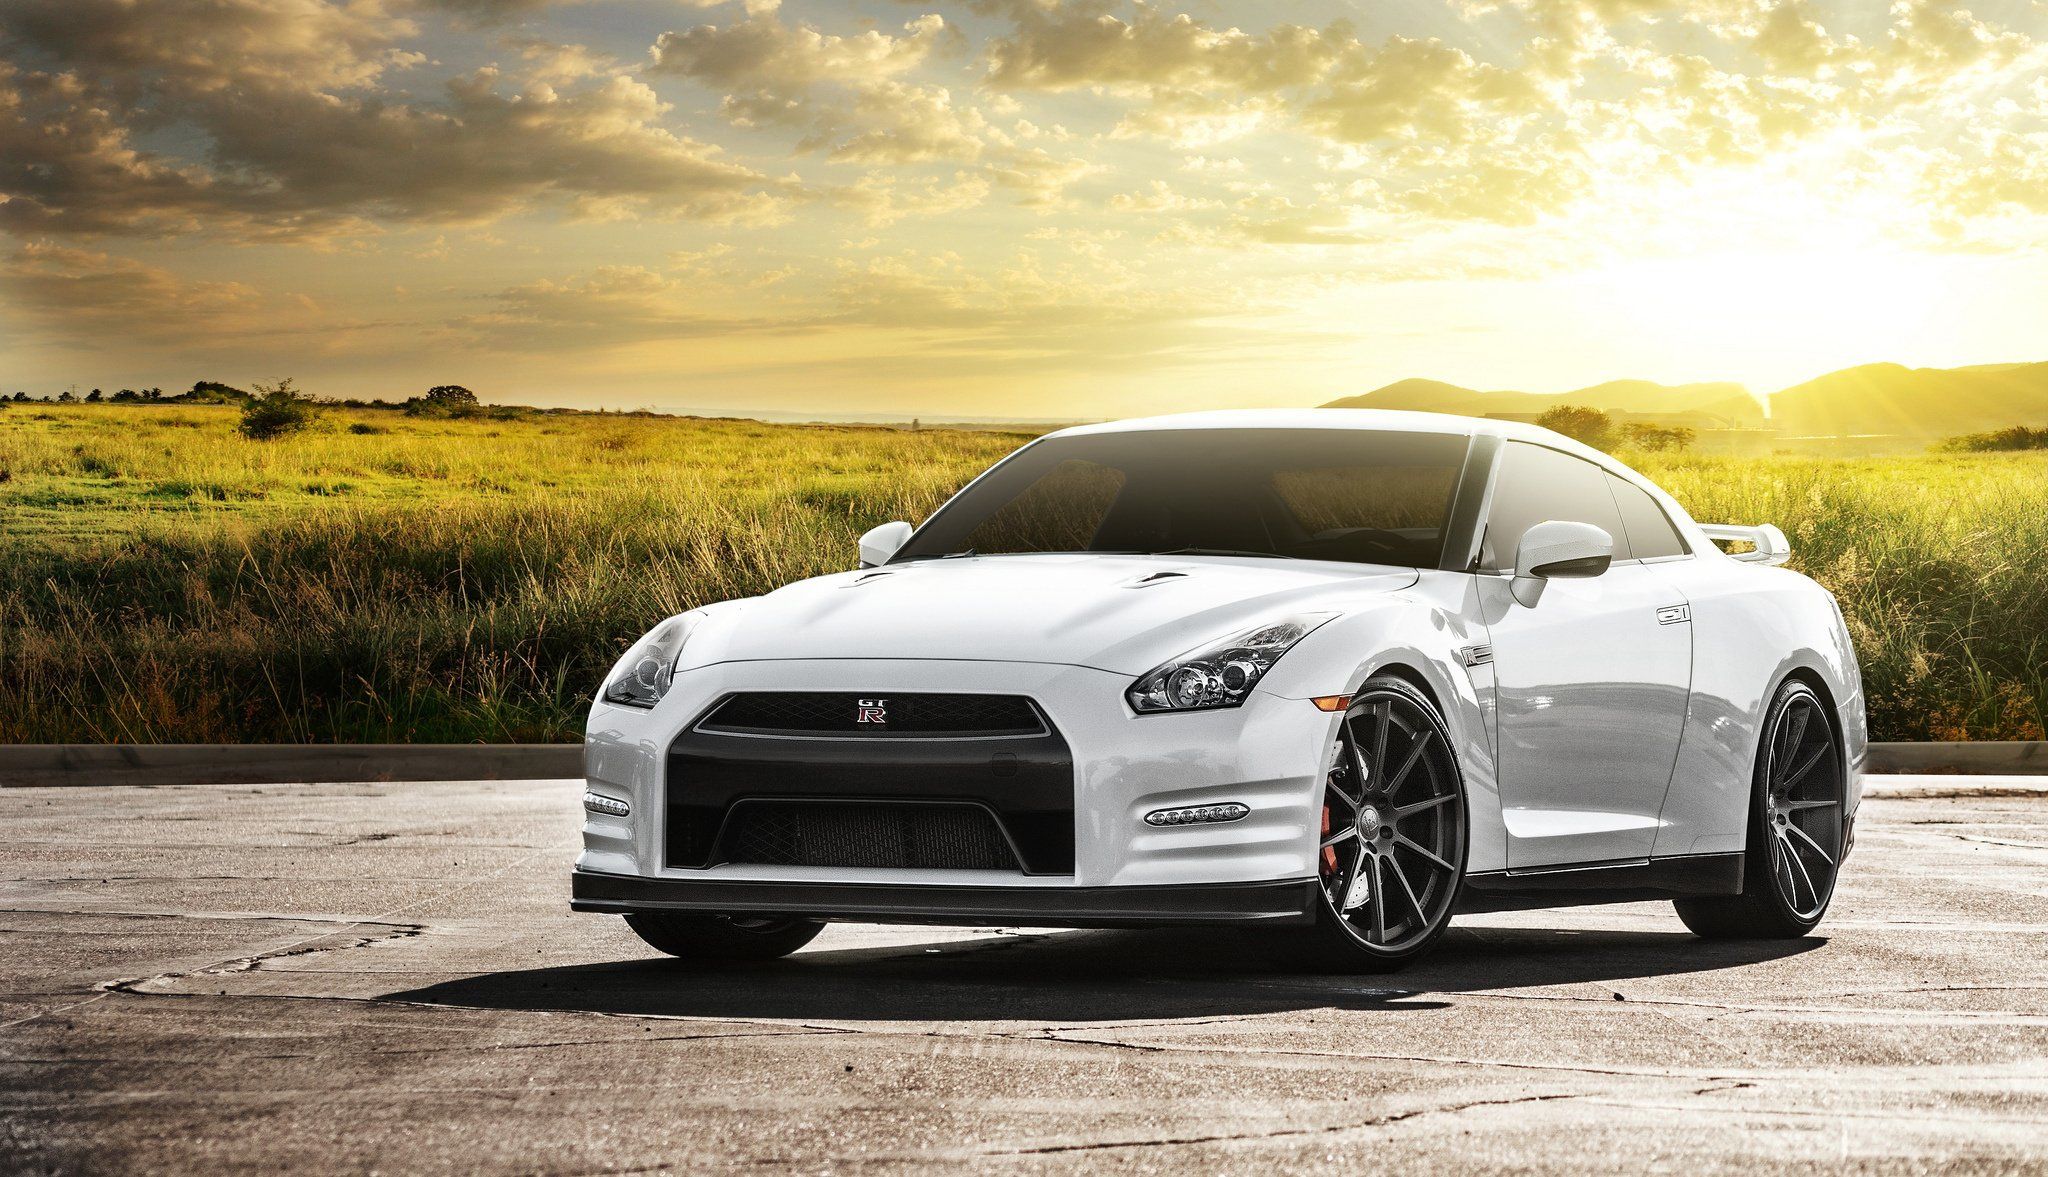 Nissan Gt R On The Background Of Field With Rising Sun